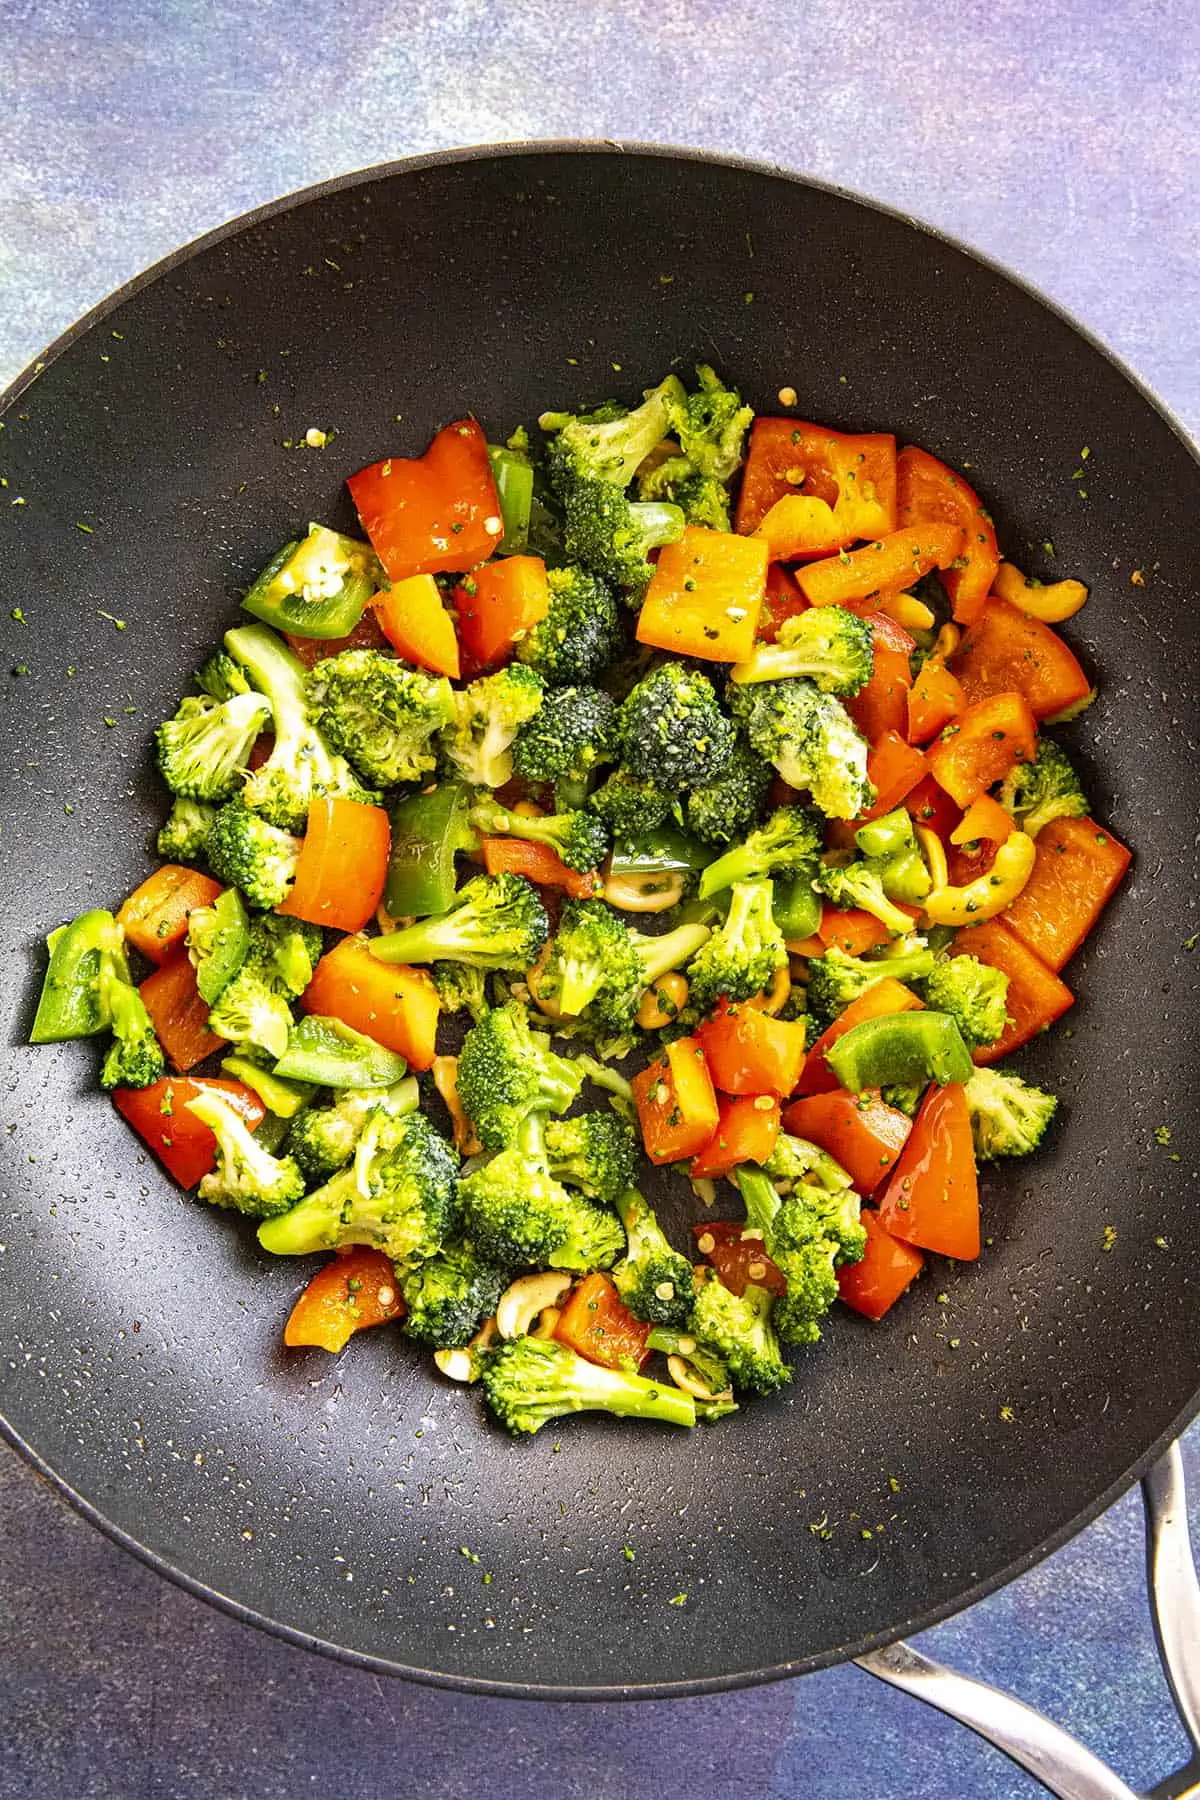 Cooking the vegetables in a hot pan